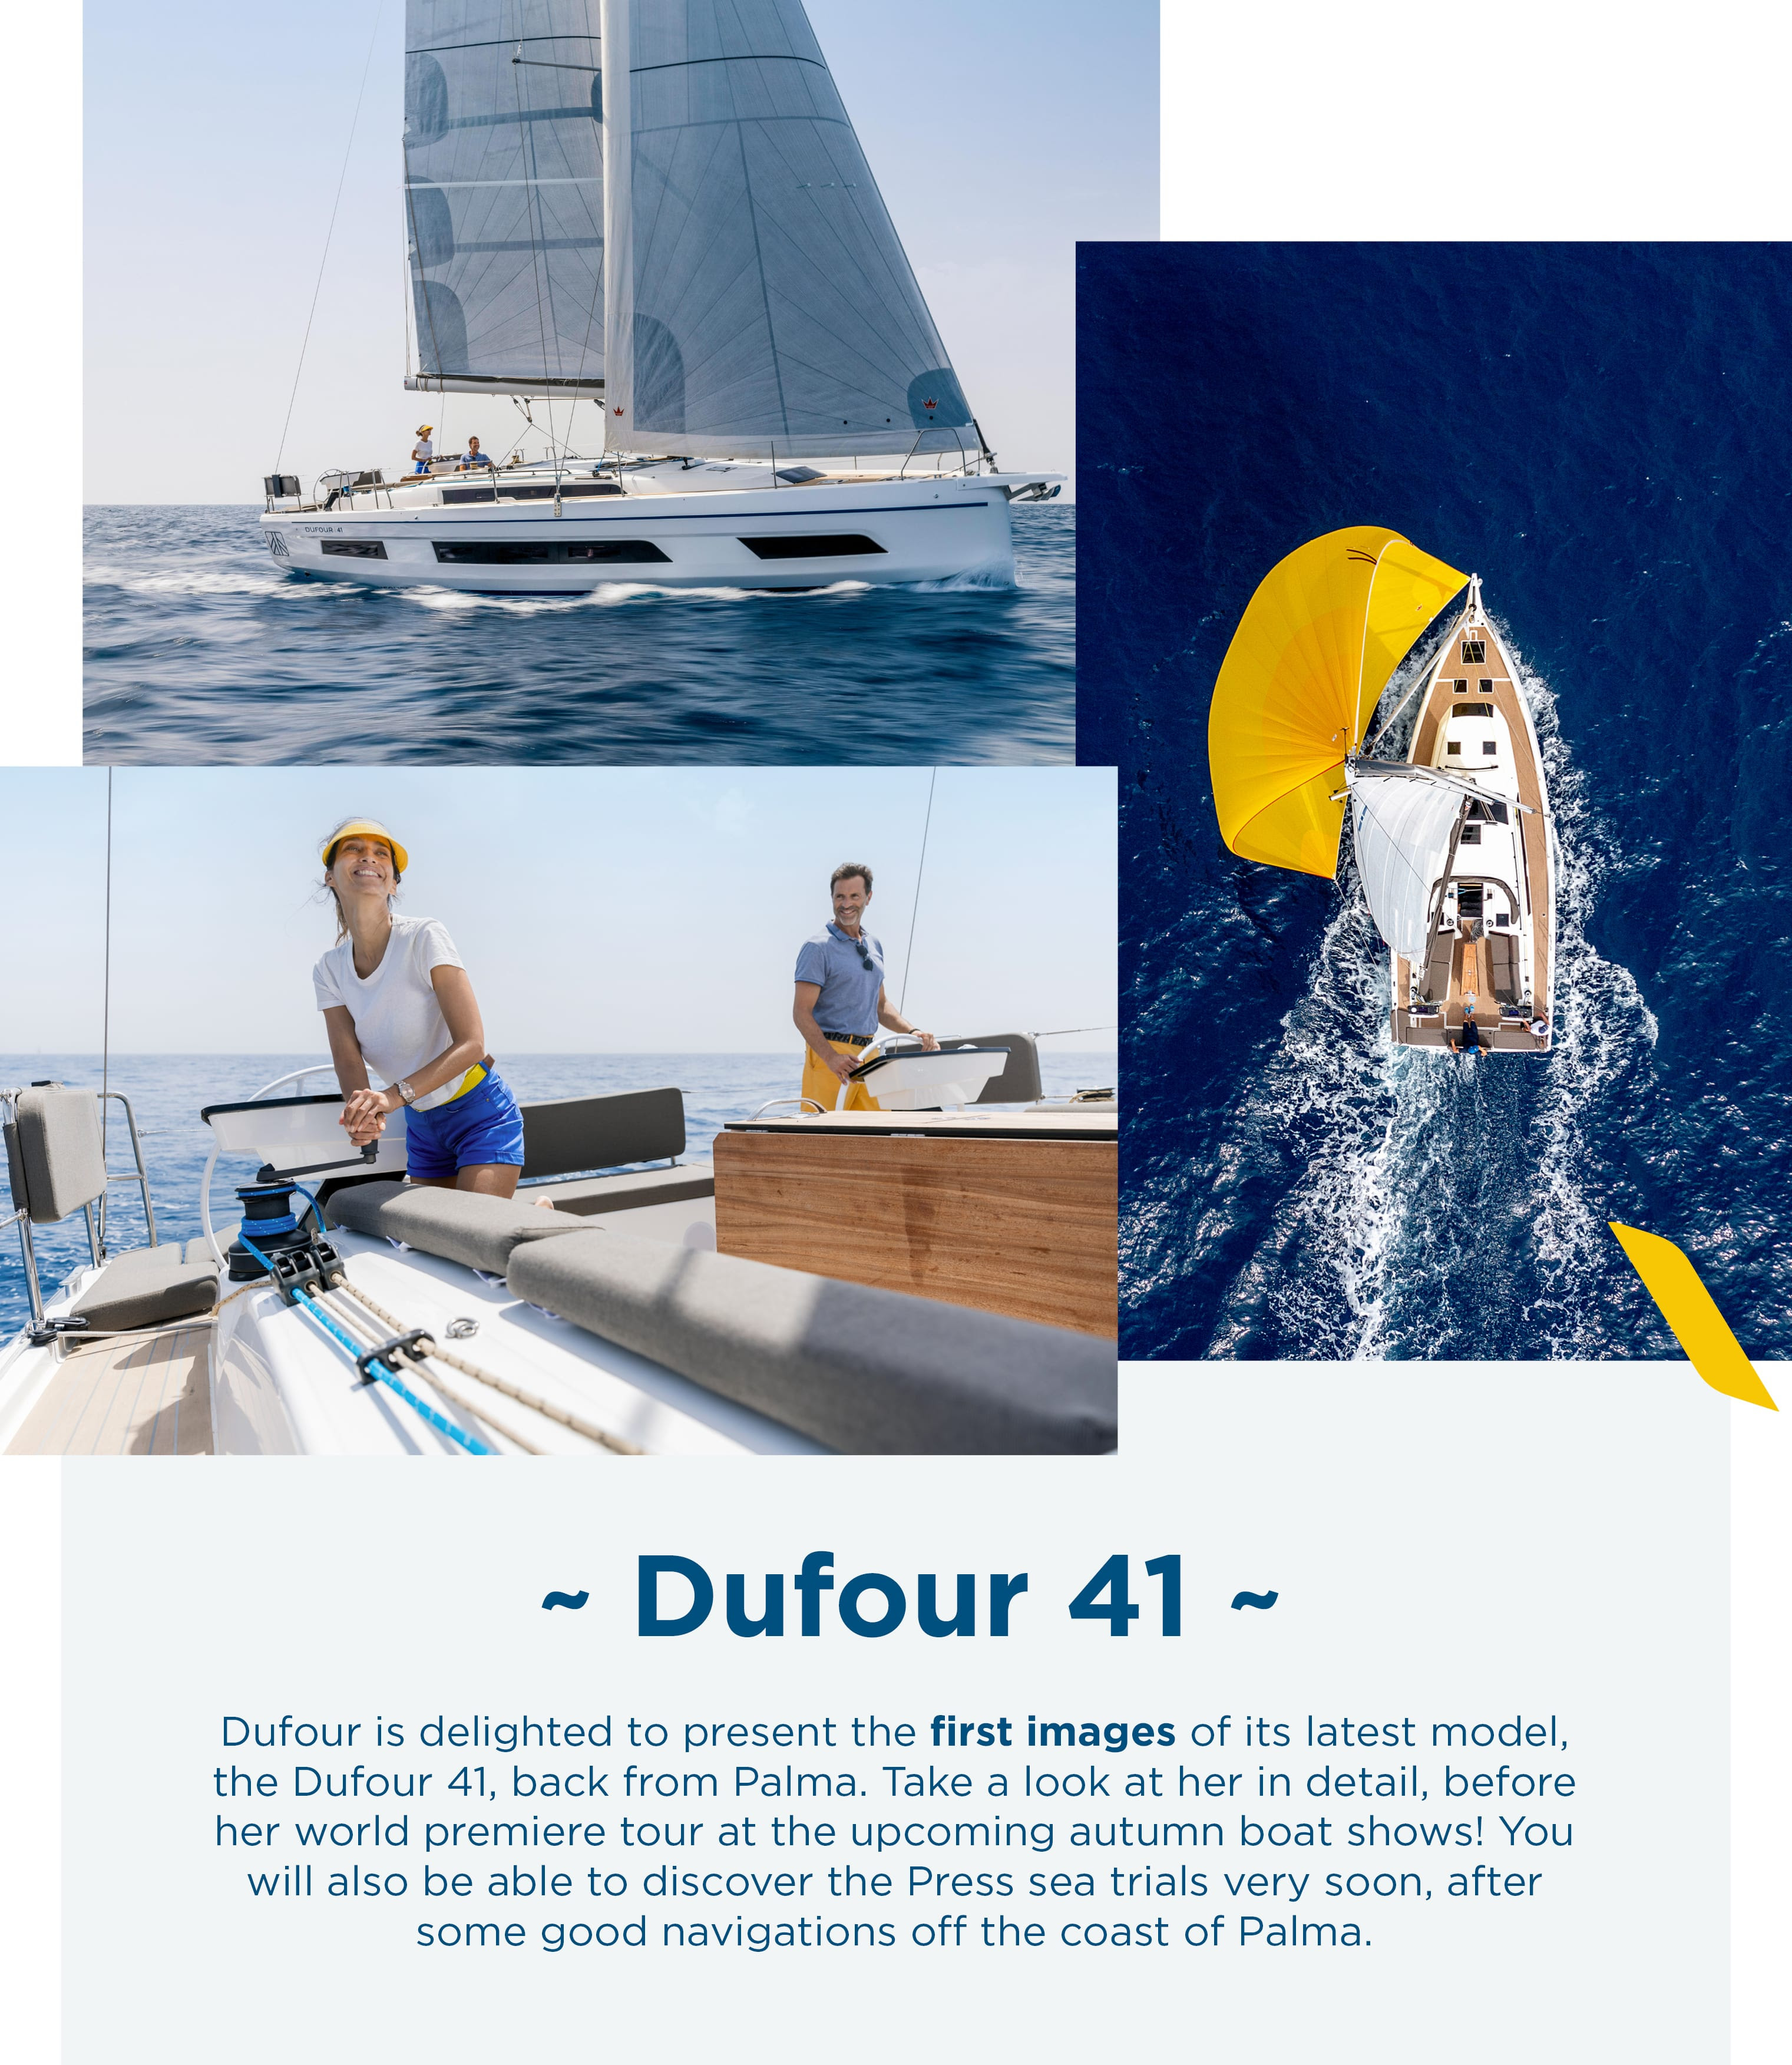 Dufour Yachts - The new Dufour 41 photos are online!